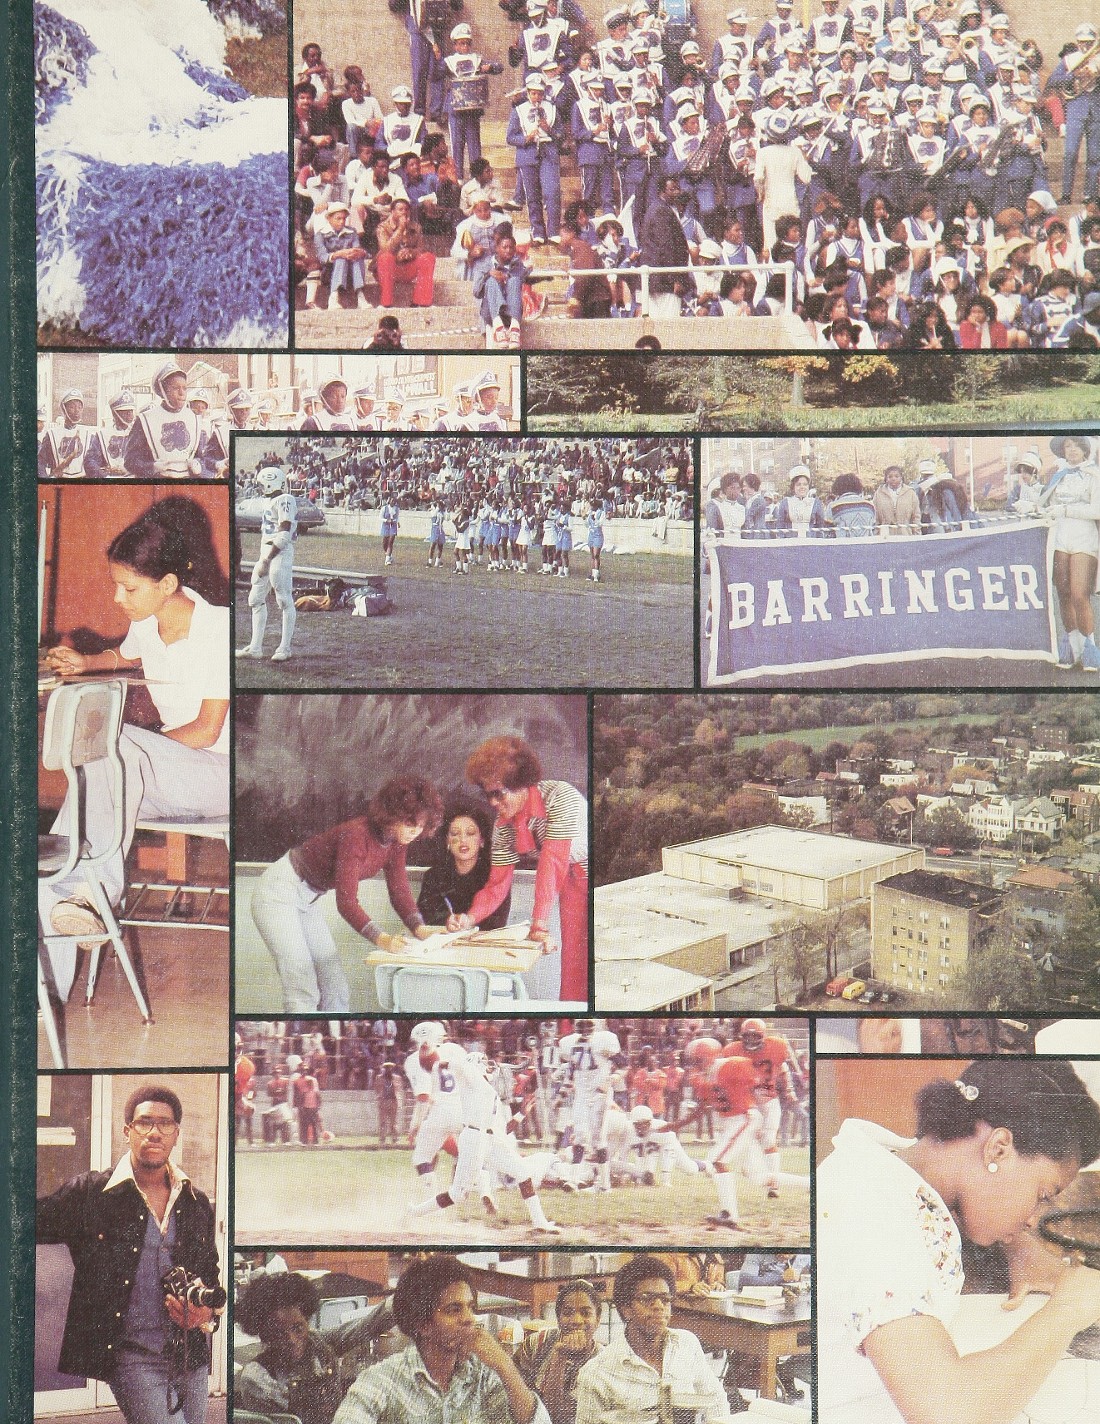 1977 Yearbook From Barringer High School From Newark New Jersey For Sale